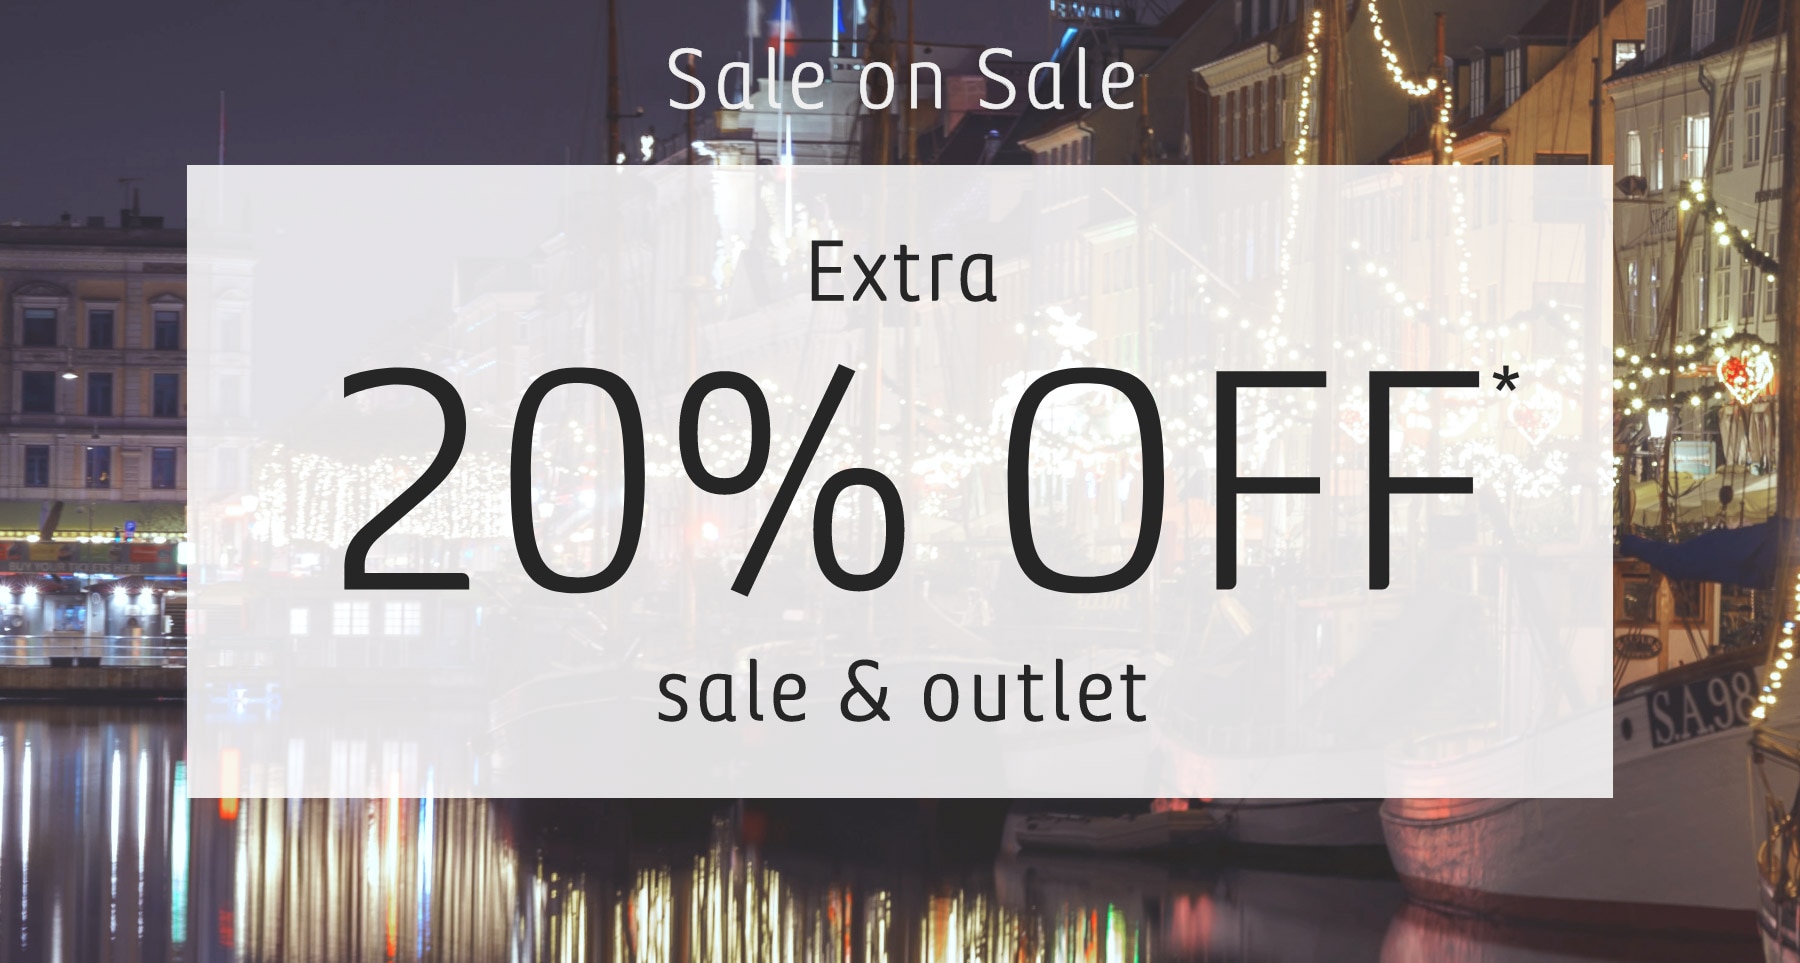 Sale on Sale Extra 20% OFF* sale & outlet